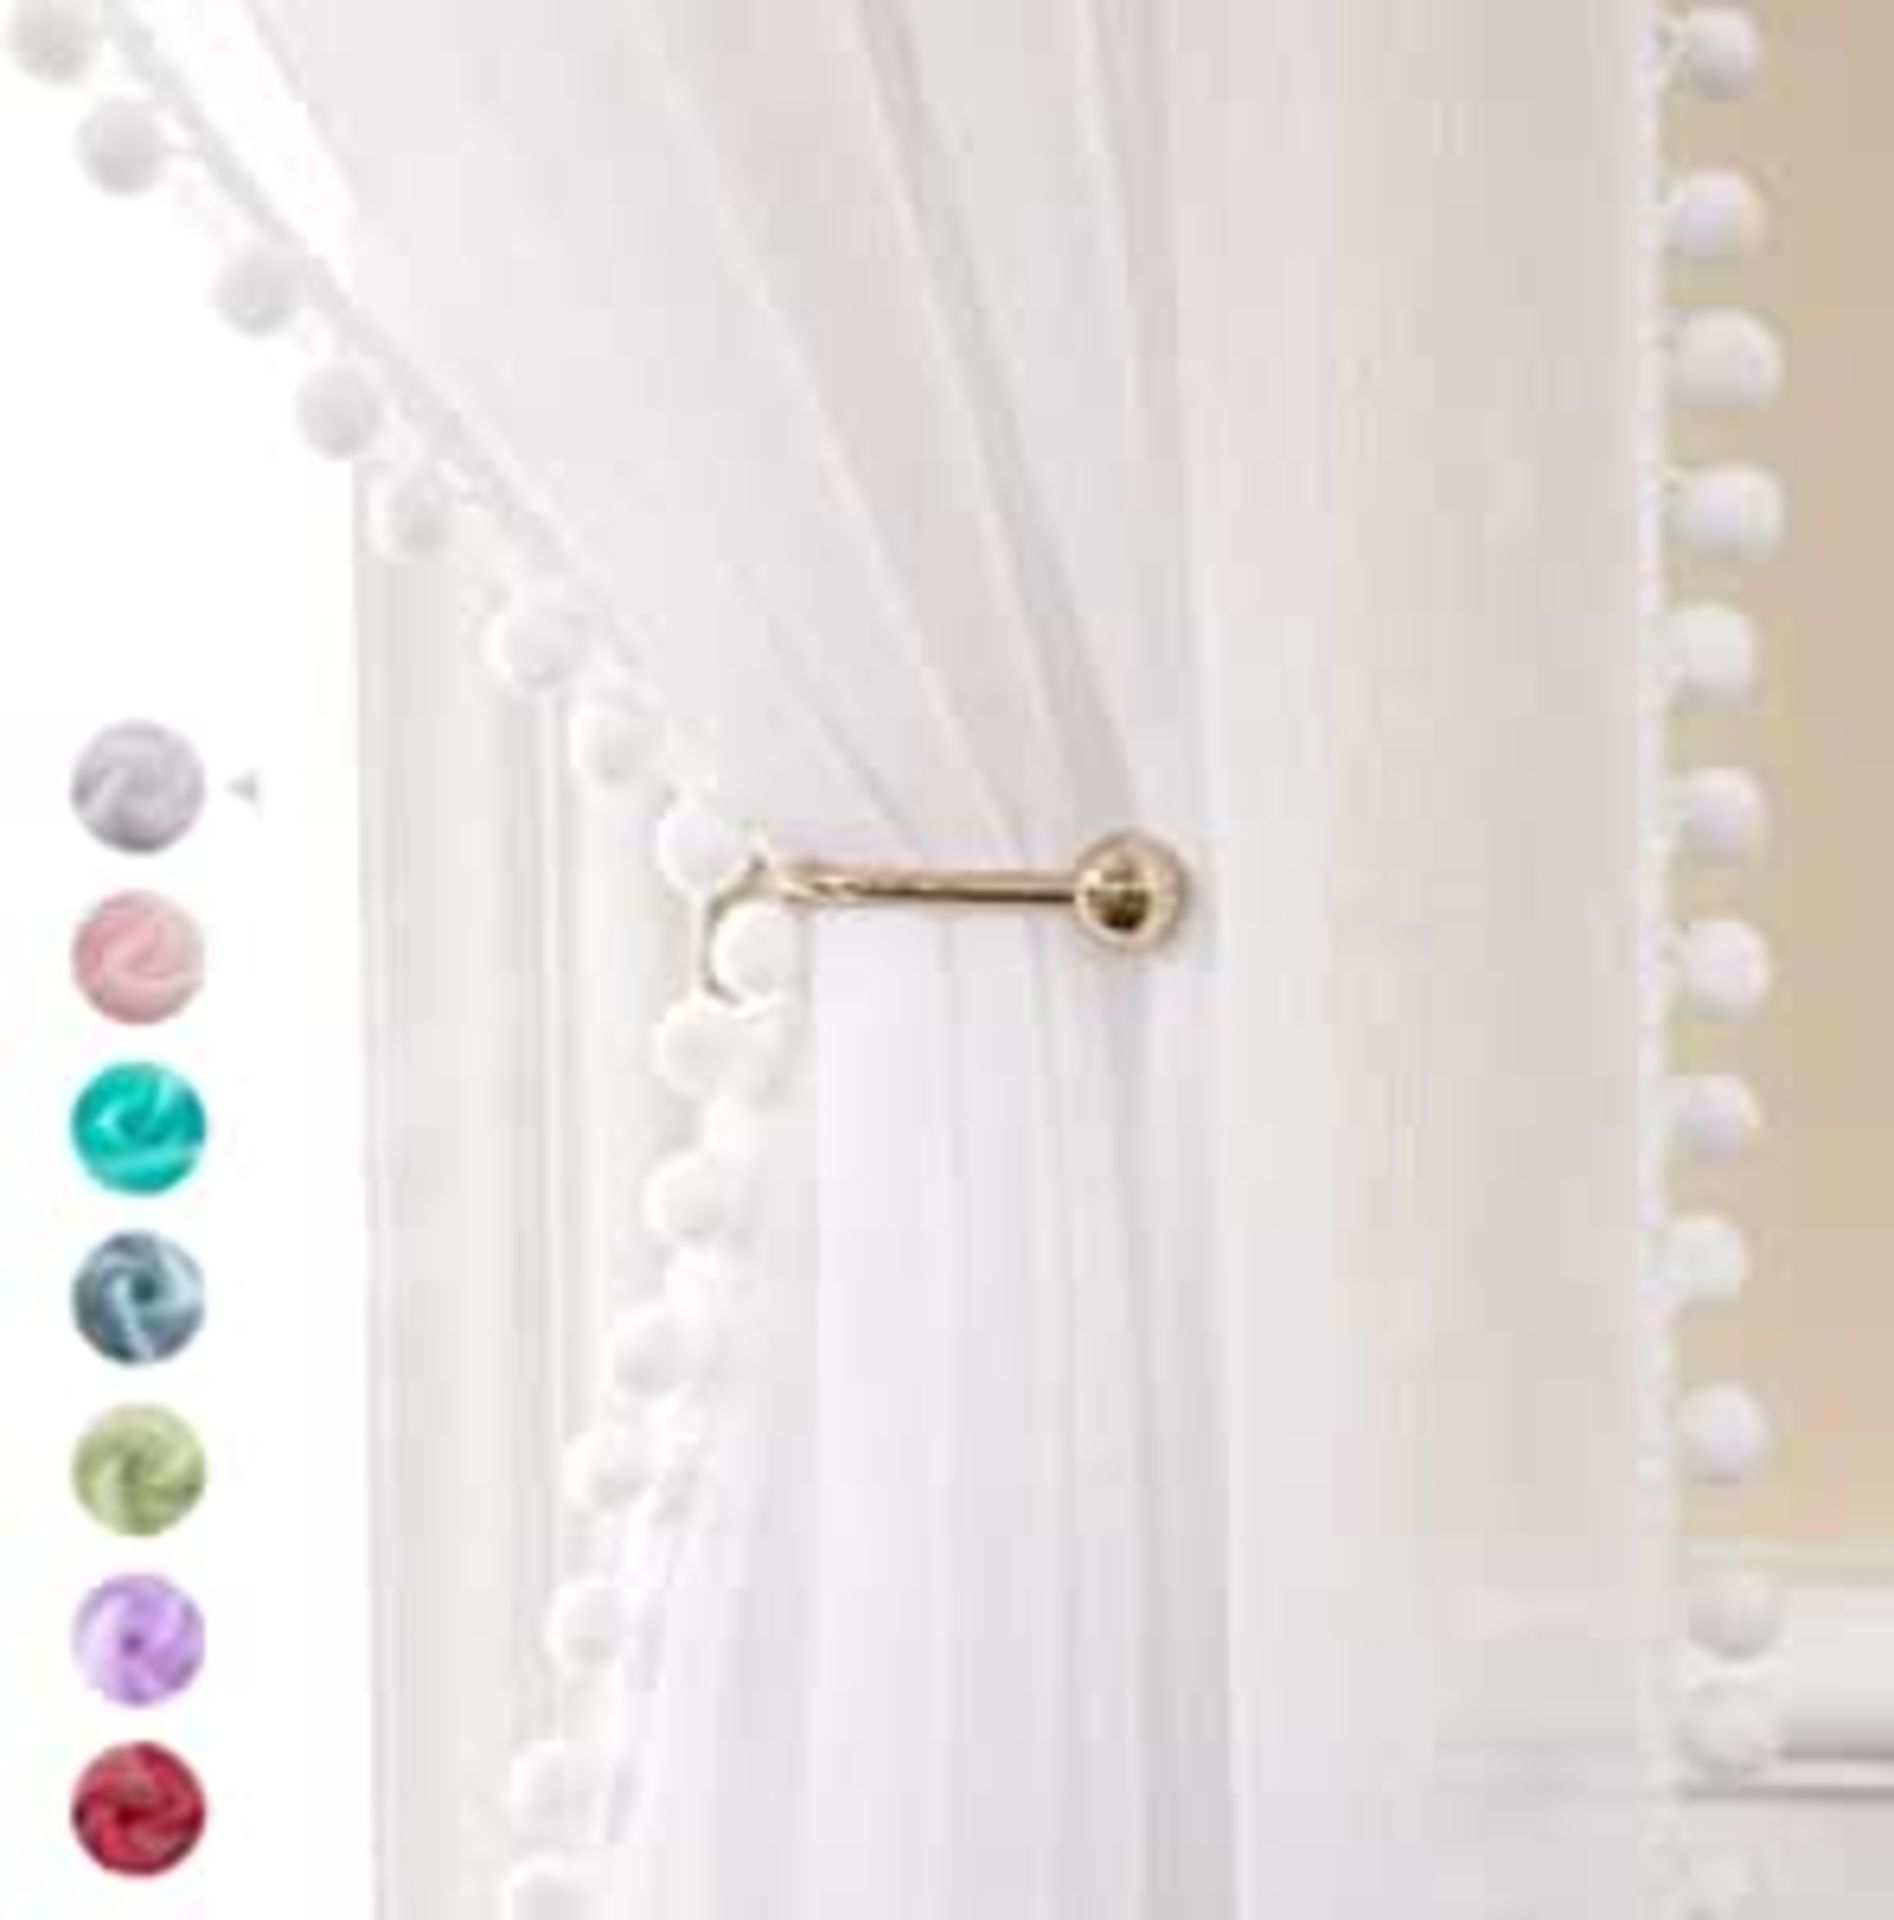 MIULEE Sheer Curtains with Pom Poms-Turquoise Voile Curtains for Bedroom Living Room, Pretty Rod Poc